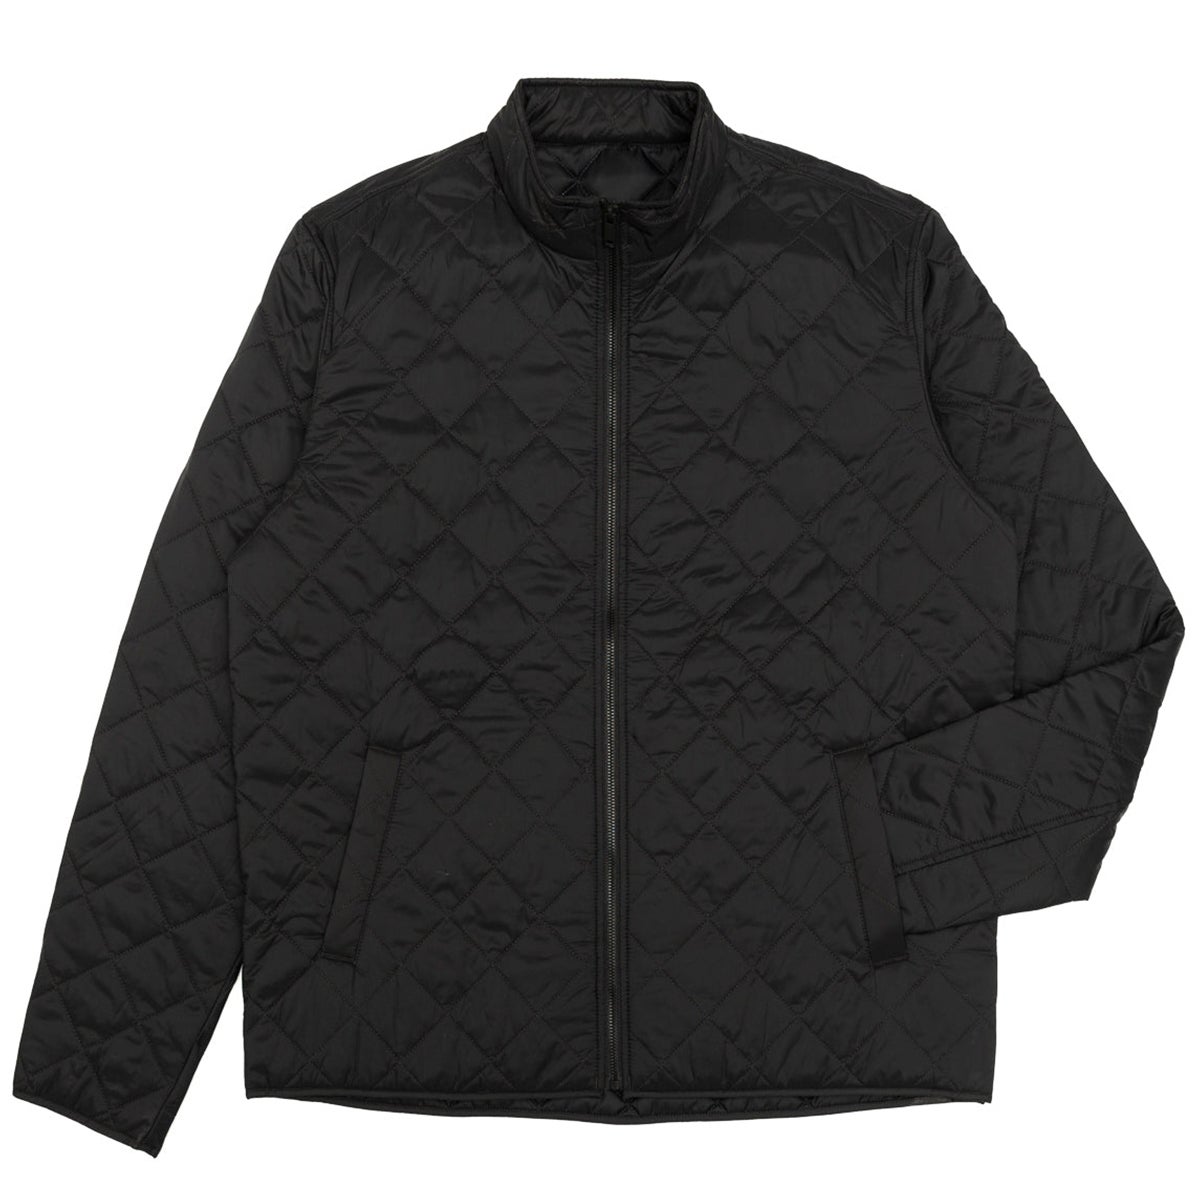 Chrystie NYC OG Logo Quilted Jacket in Black | Boardertown